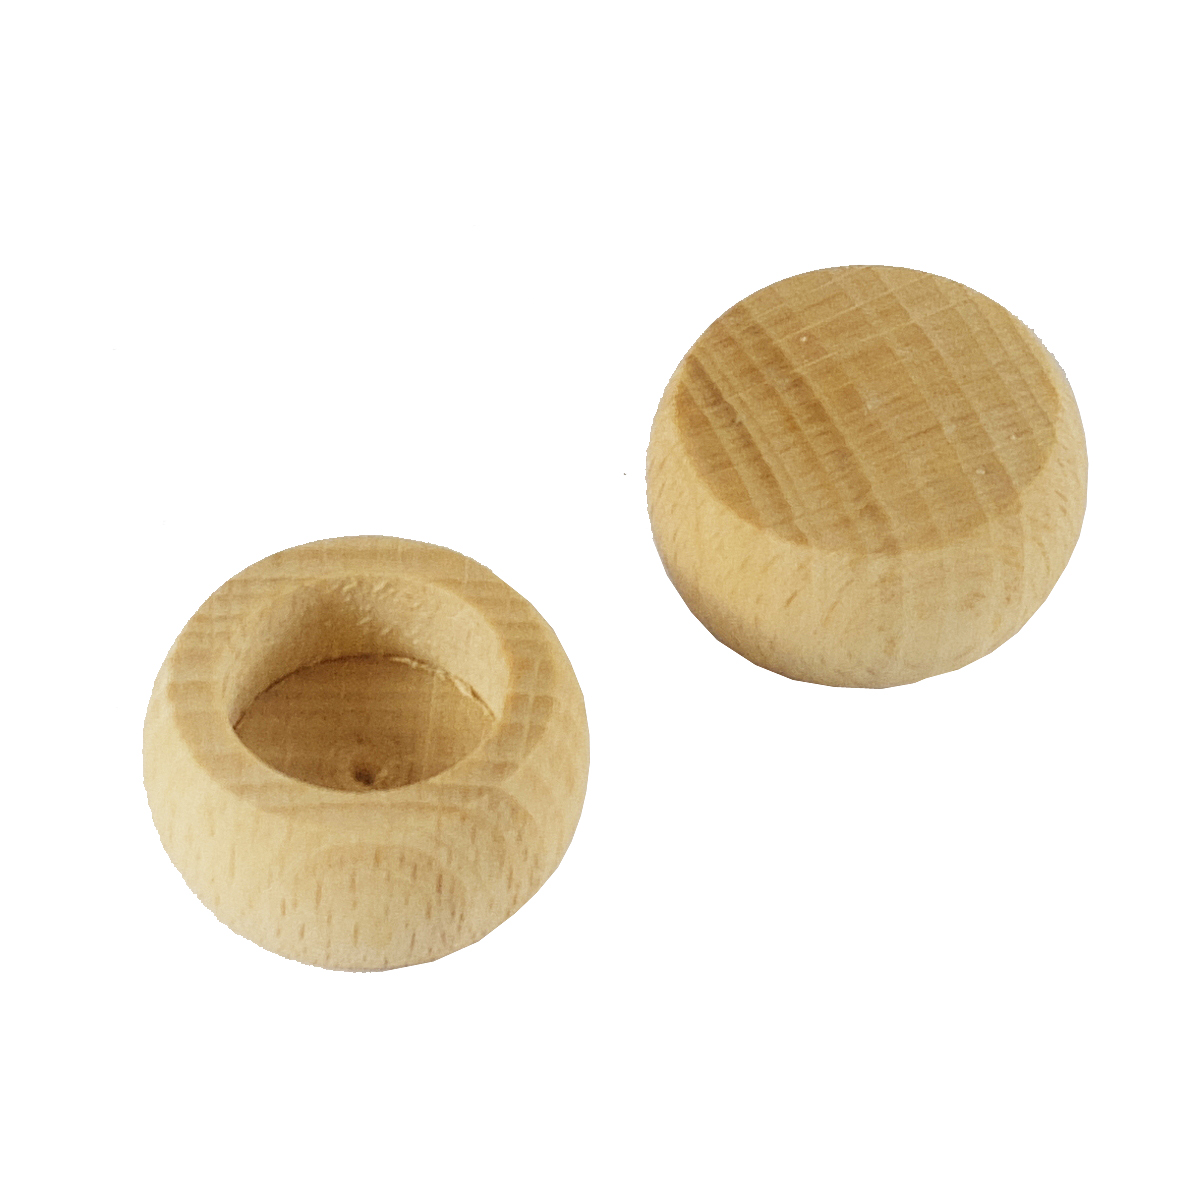 Wooden nuts